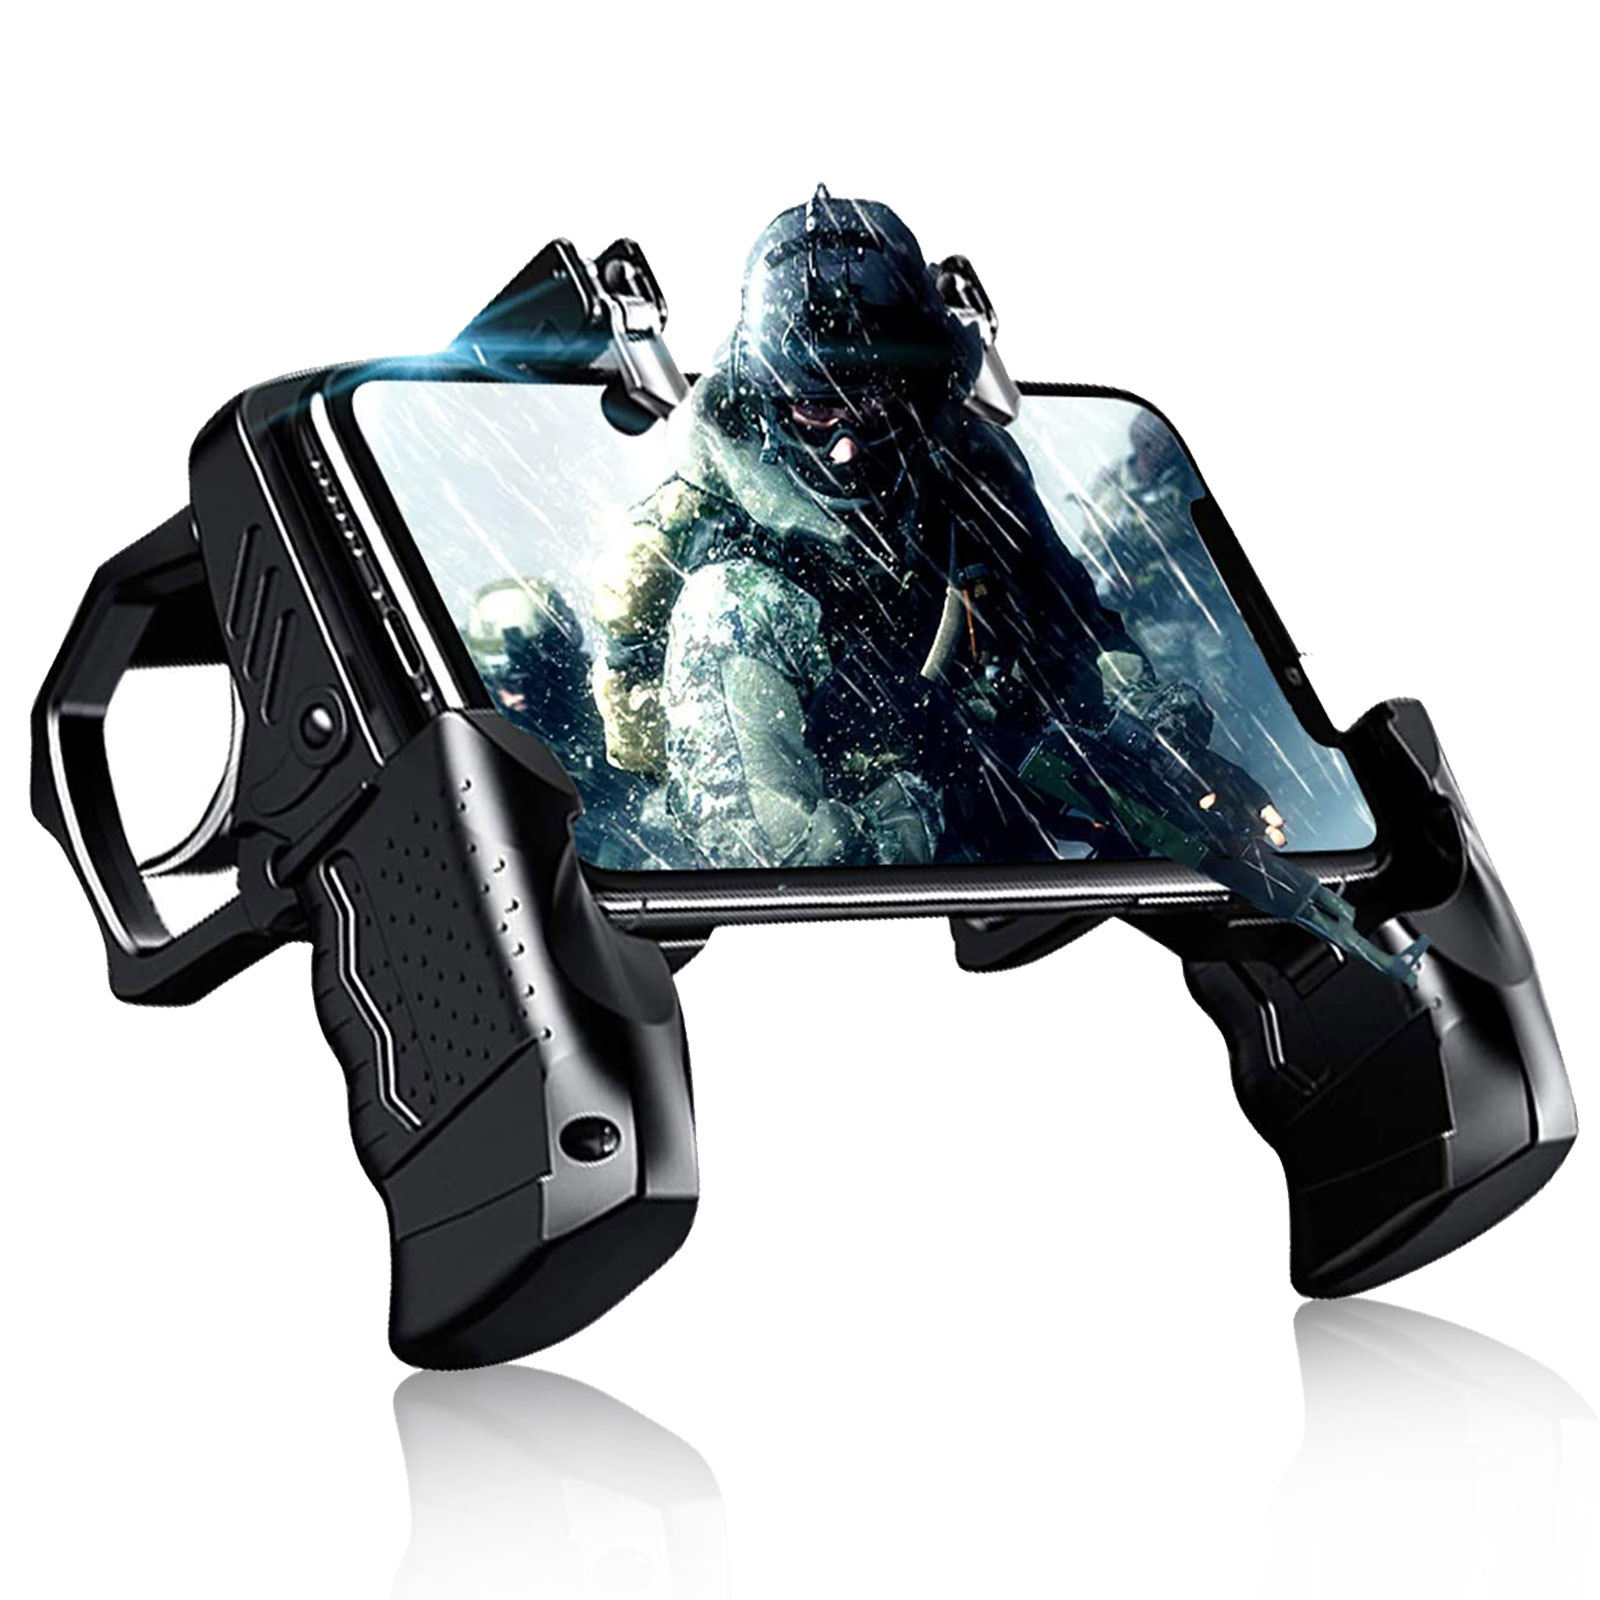 Can You Play PUBG Mobile With a PUBG Mobile Controller?